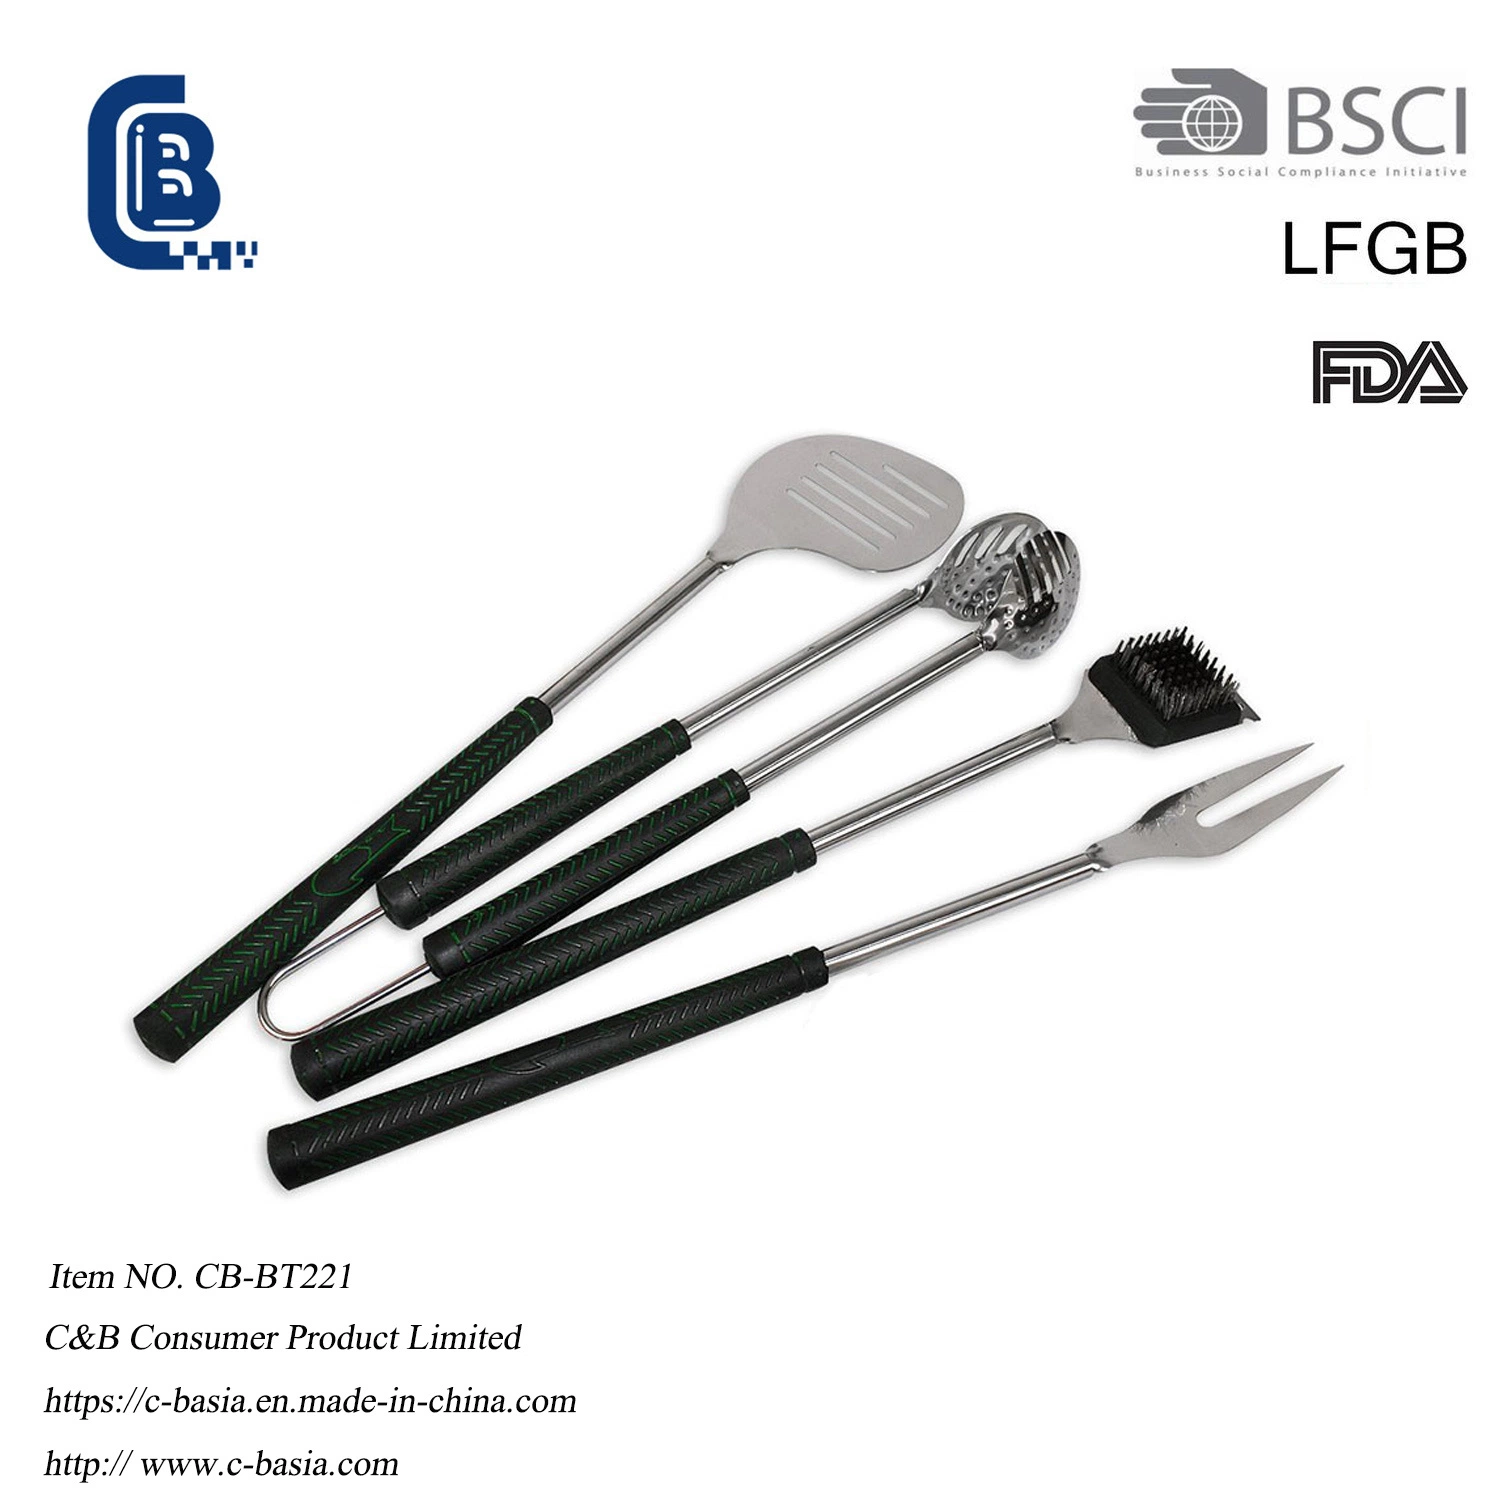 4PCS Stainless Steel Luxury Golf Grilling BBQ Tools Set, Outdoor Cooking Camping Barbecue Grill Tool Set 6